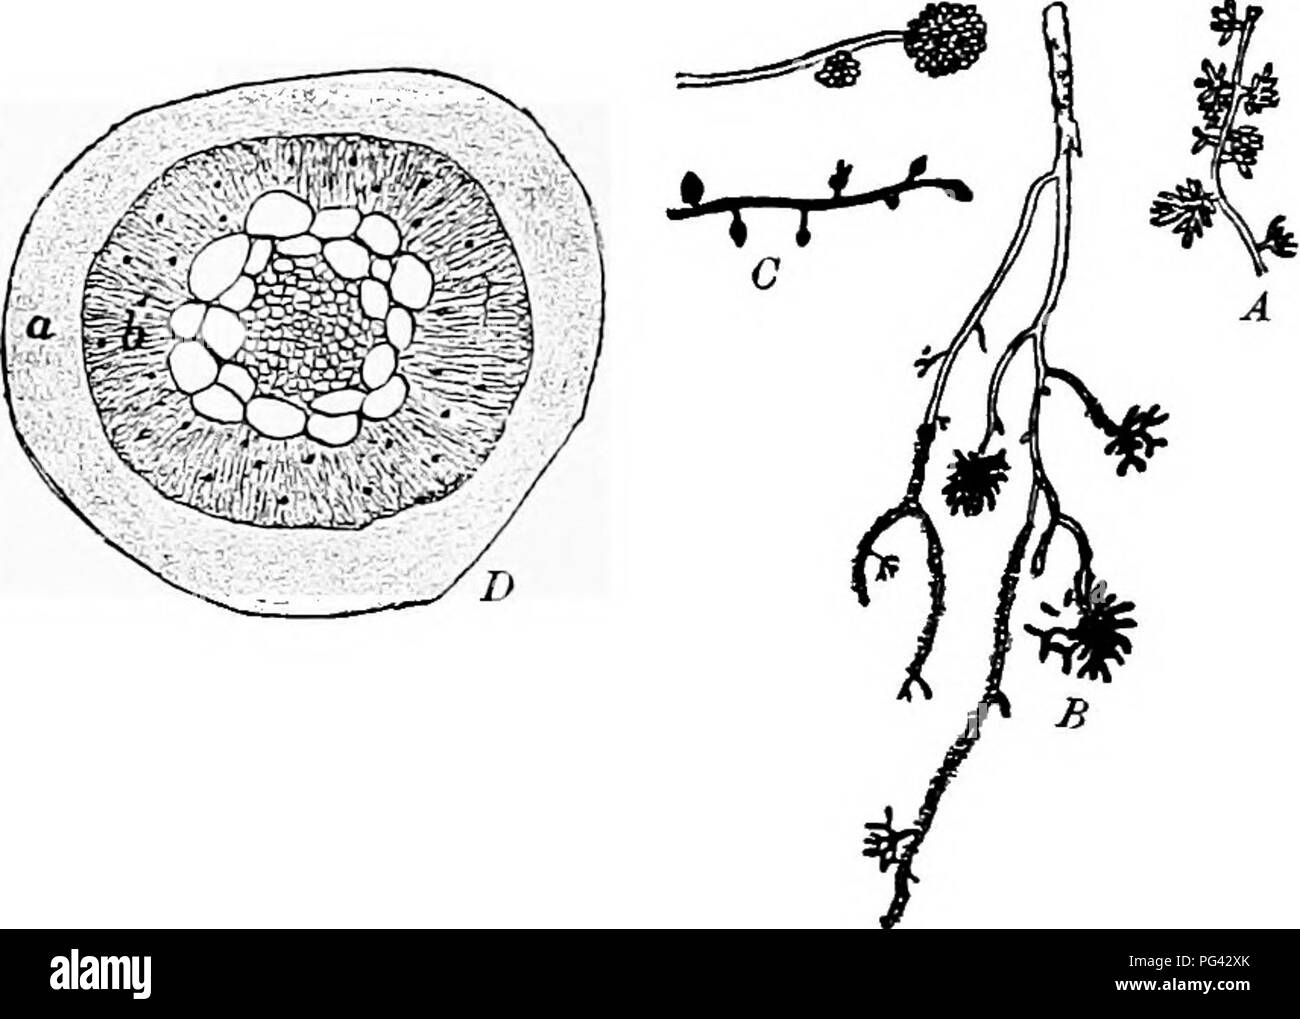 . Diseases of plants induced by cryptogamic parasites : introduction to the study of pathogenic Fungi, slime-Fungi, bacteria, &amp; Algae . Plant diseases; Parasitic plants; Fungi. 96 SYMBIOSIS. in Monotropa. The root-system of a tree has not only to secure nourishment, but also the rigidity and stability of the tree.^ This latter can only be attained by a wide distribution of roots in the firm subsoil free from humus, where normal roots with root-hairs will be formed. The nursing function of the mycorhiza seems thus to be less important than in the case of Monotropa.. Fig. IS.—Mycorhisa of Pi Stock Photo